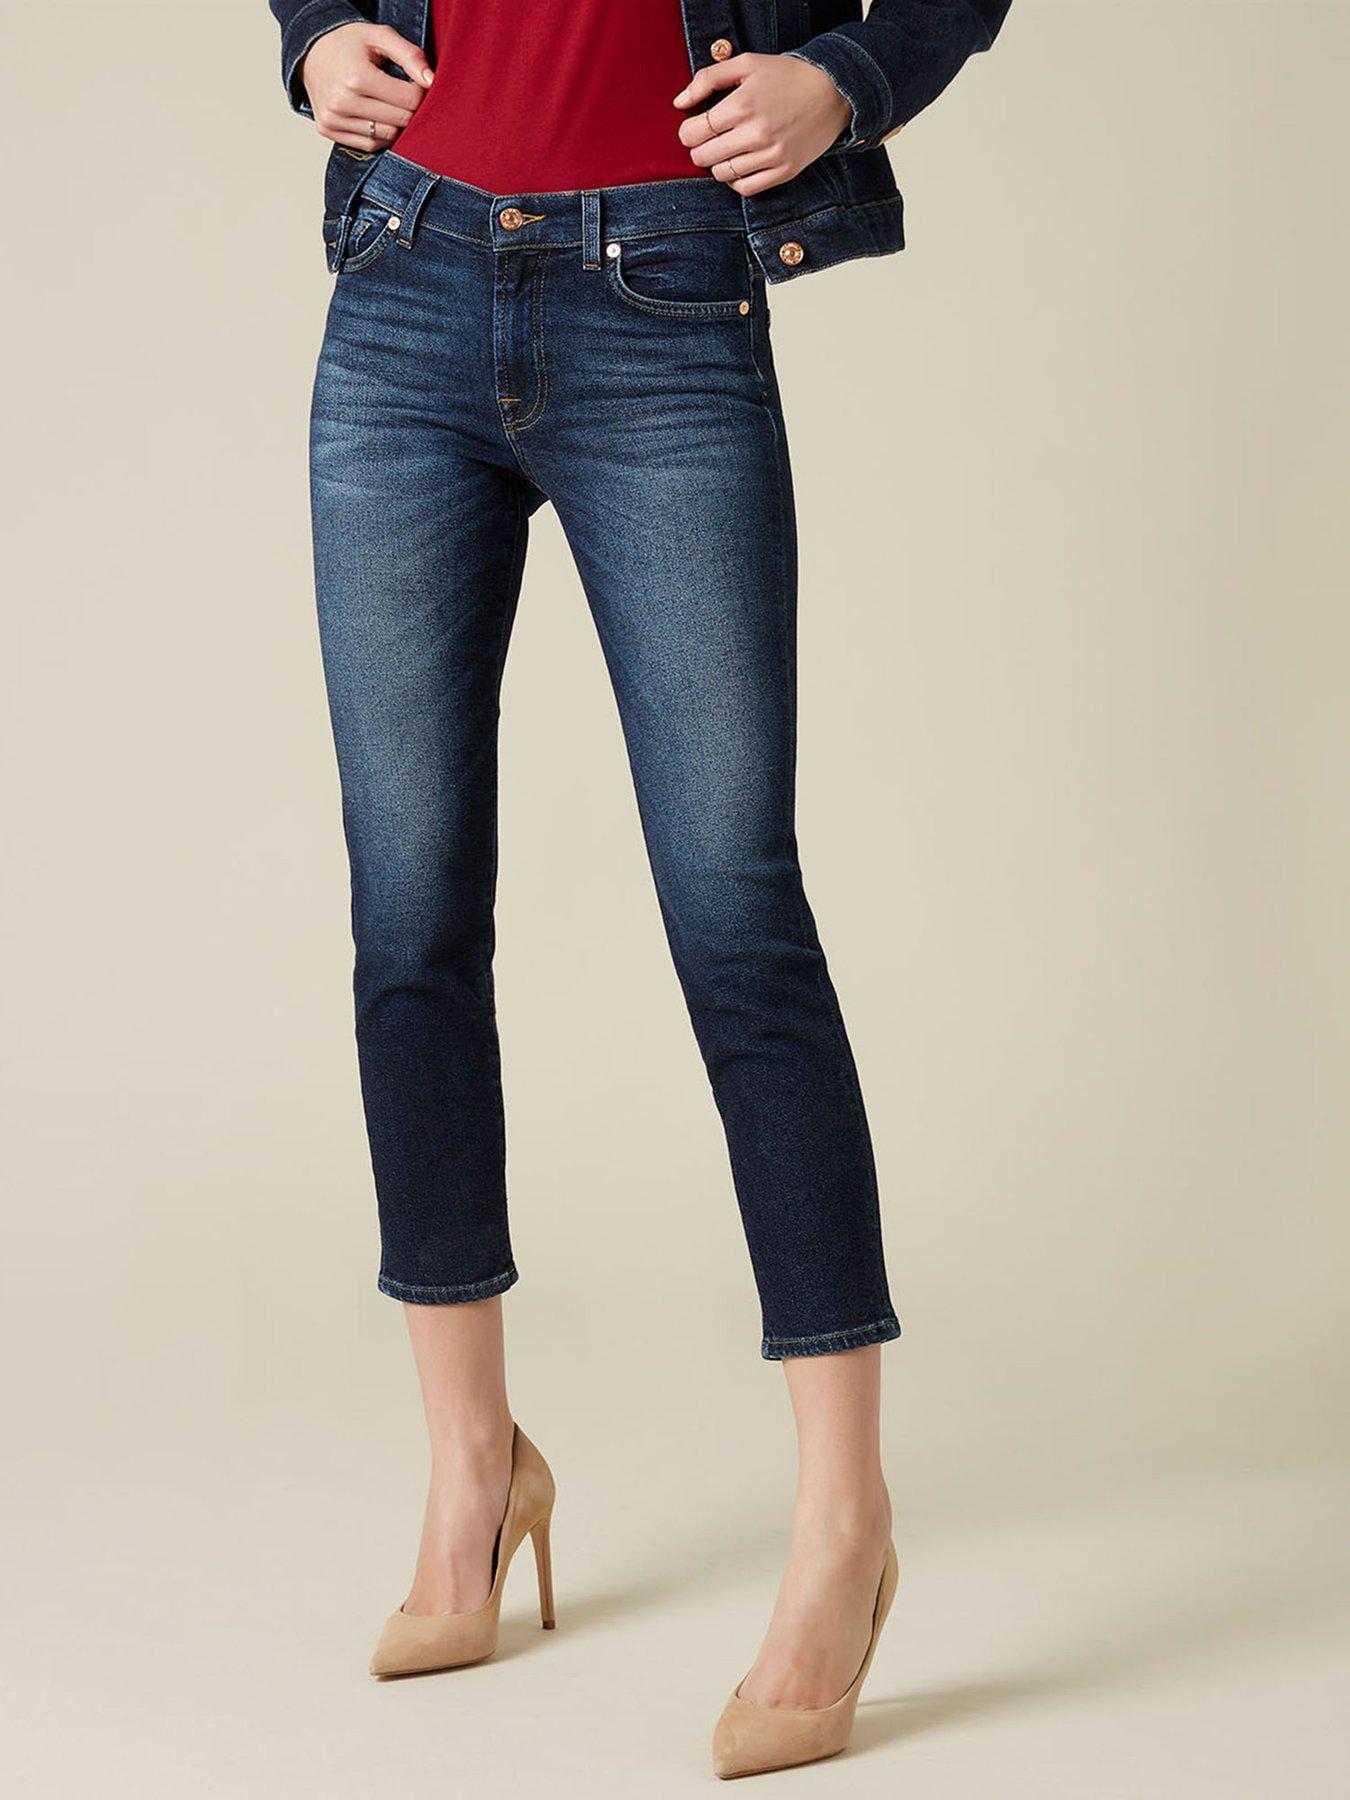 7 for all mankind uk